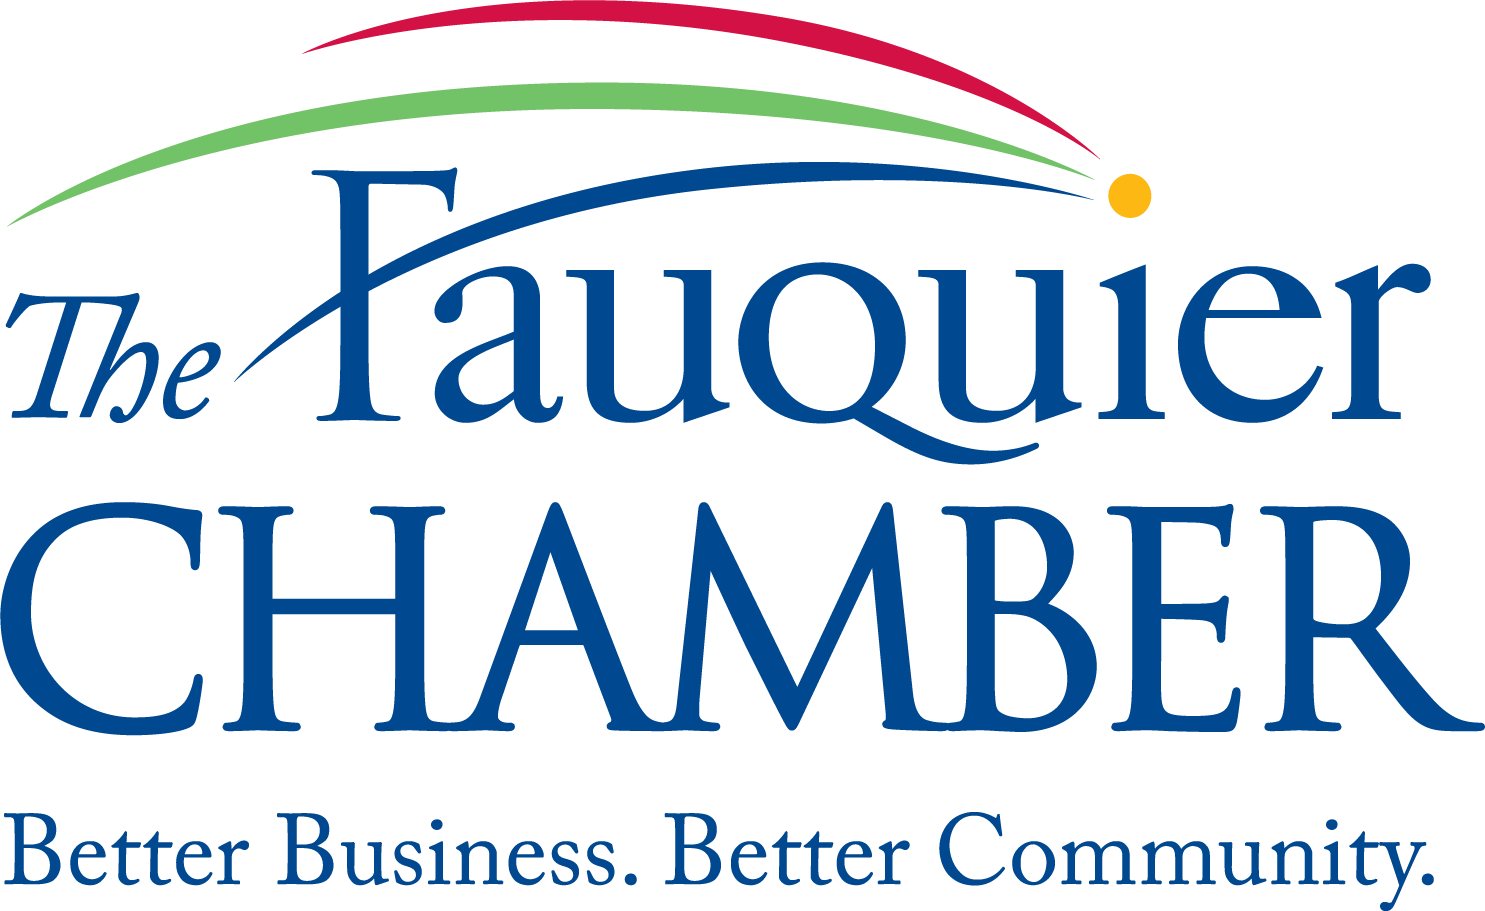 Fauquier Chamber